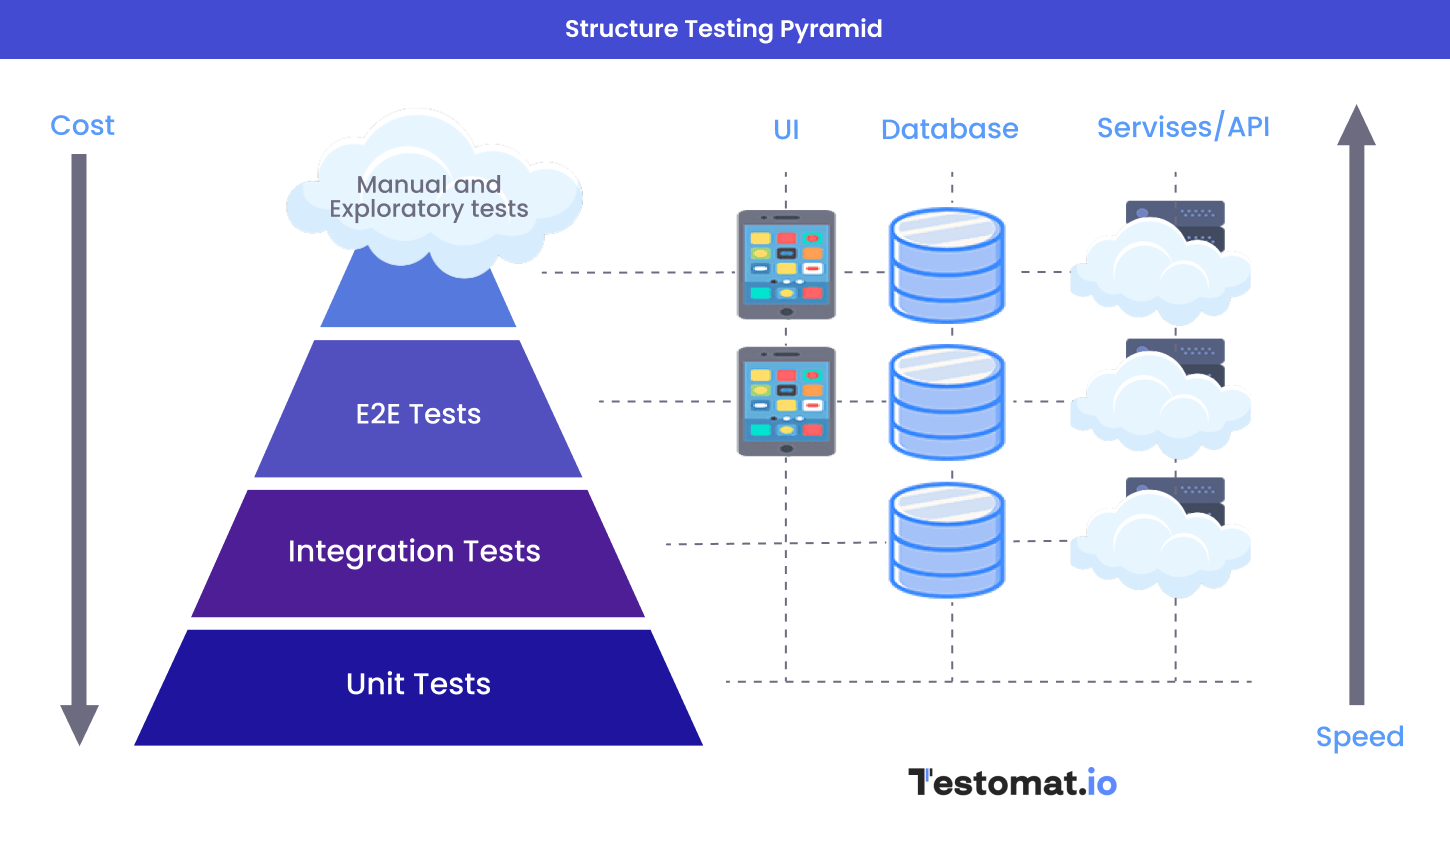  Visualization of the API layer in Testing Pyramid, illustrating different layers of testing, speed and cost of software testing automation